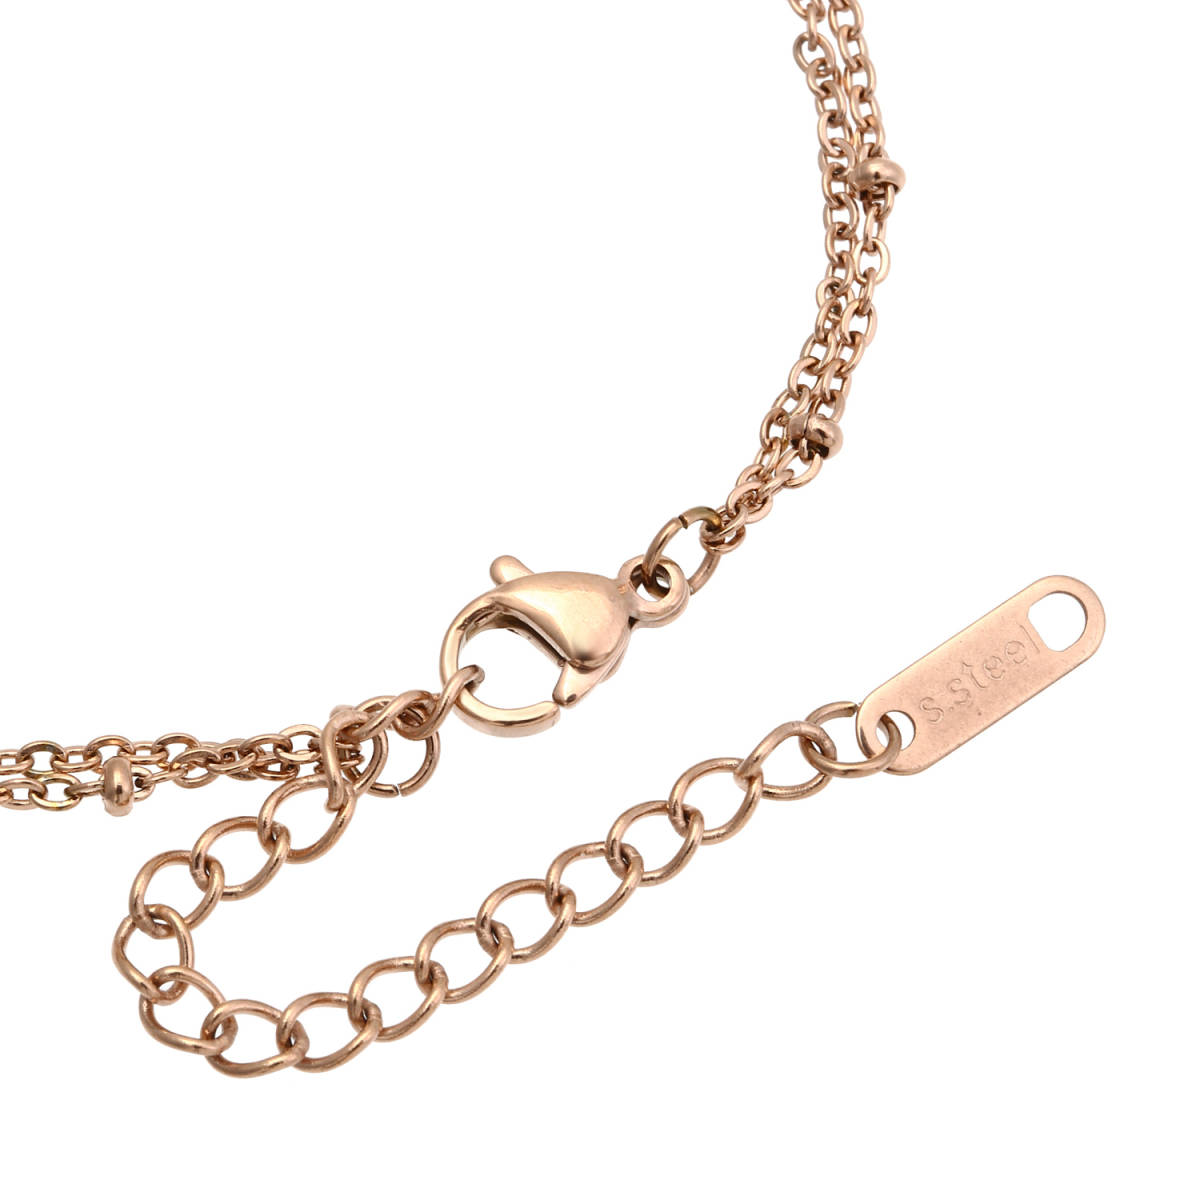 K18 pink gold one bead diamond 2 ream chain anklet on goods metal allergy correspondence lady's 